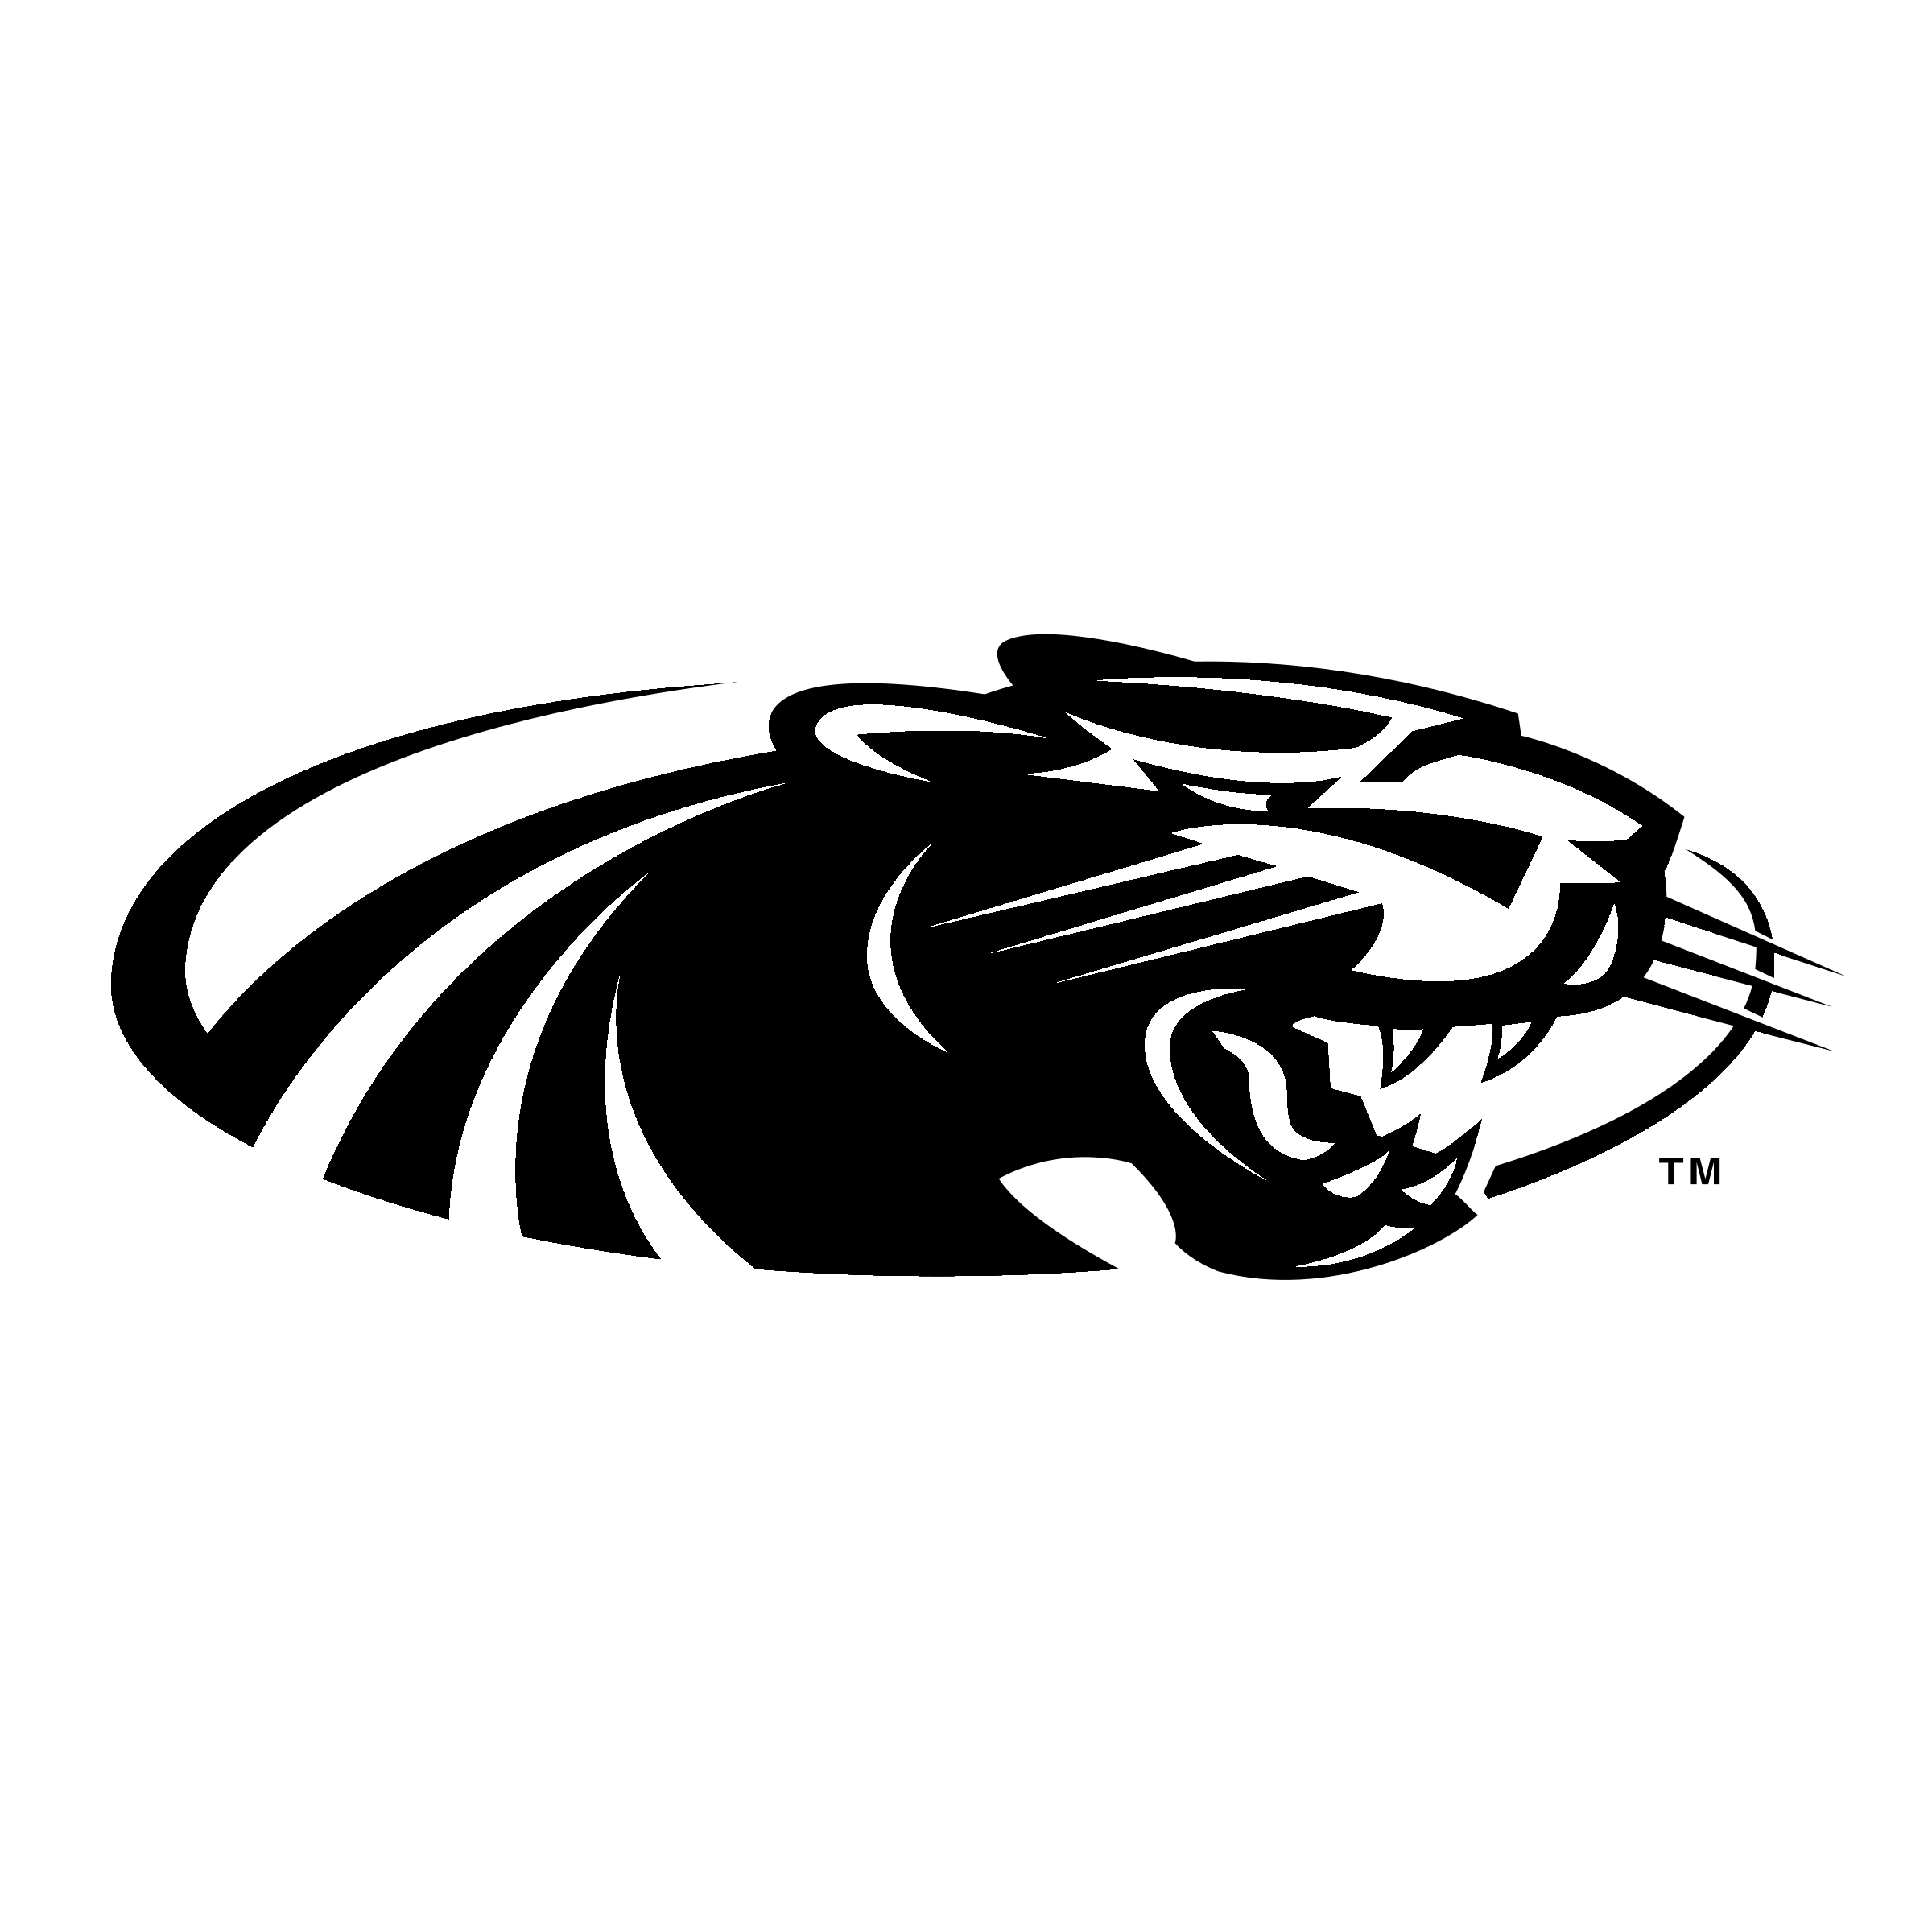 Black and White Panthers Logo - Wisconsin Milwaukee Panthers Logo PNG Transparent & SVG Vector ...